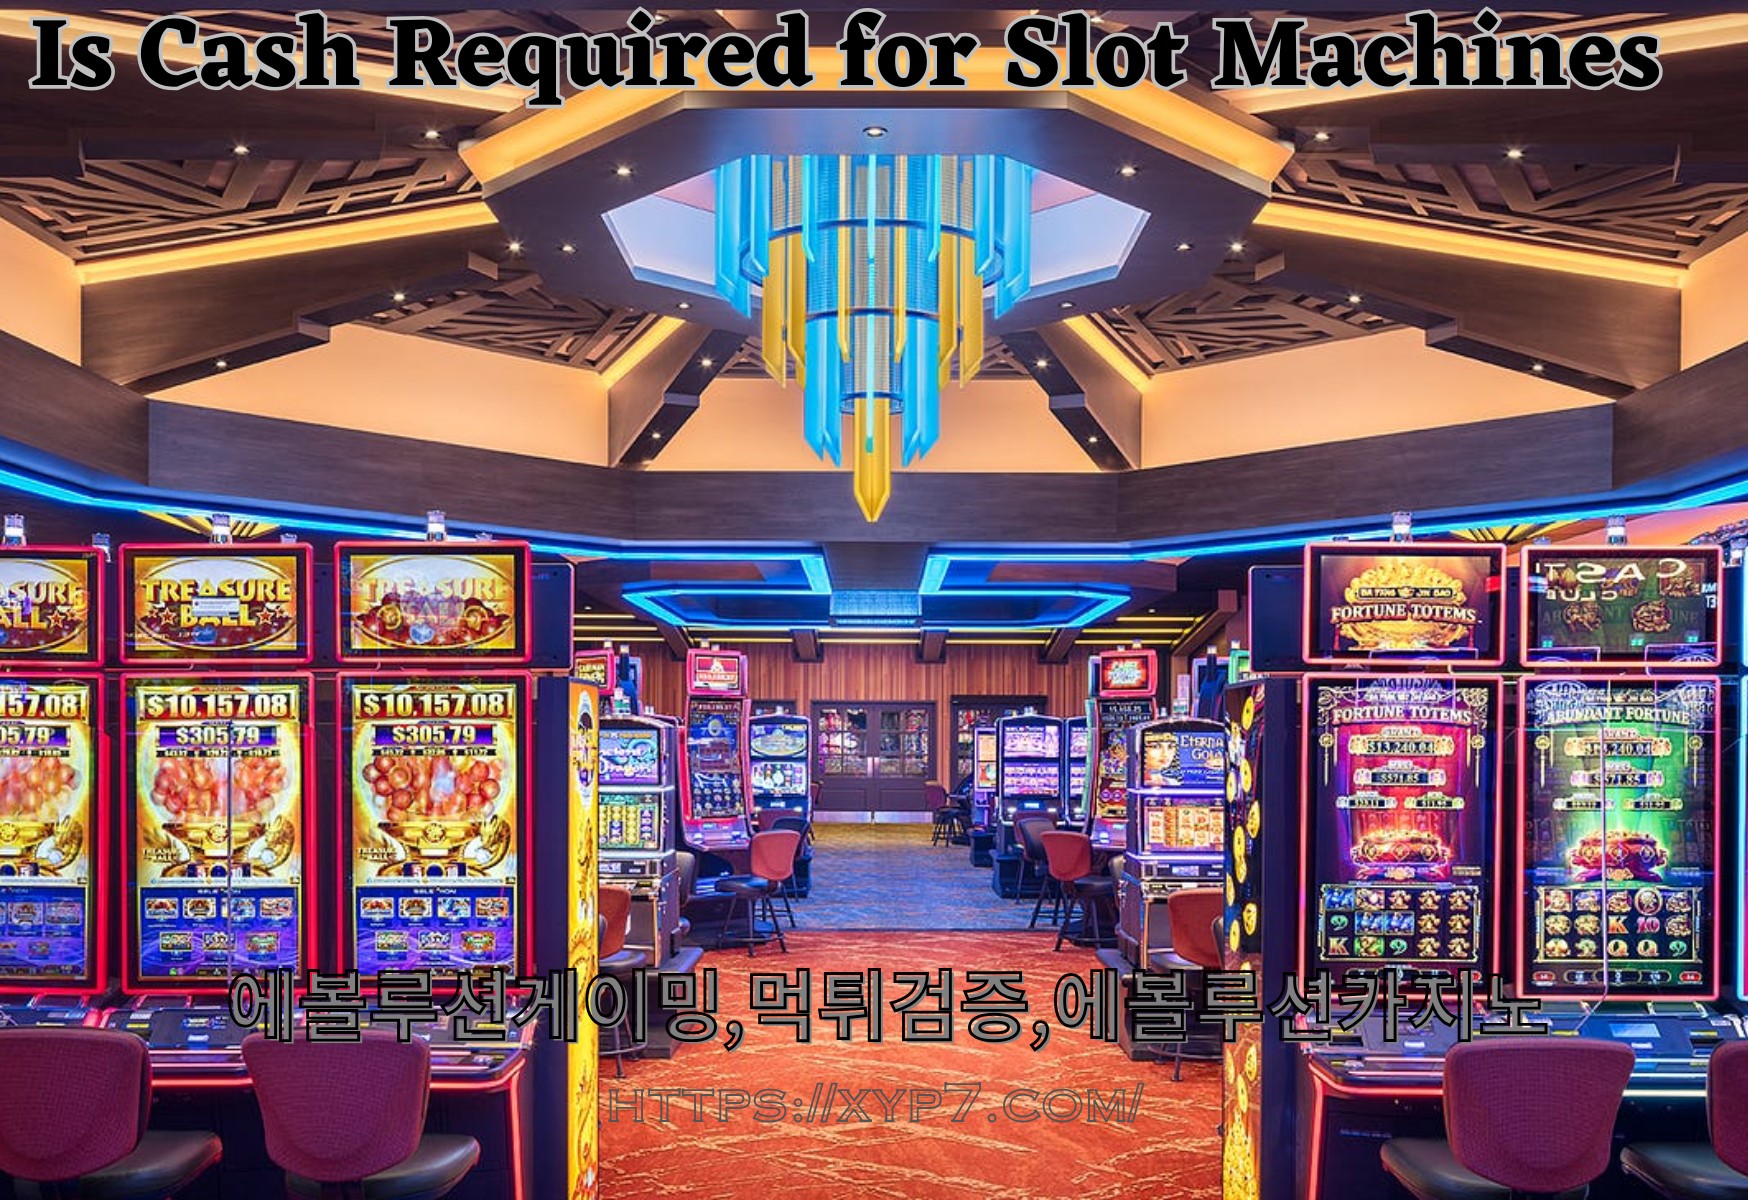 Is Cash Required for Slot Machines?